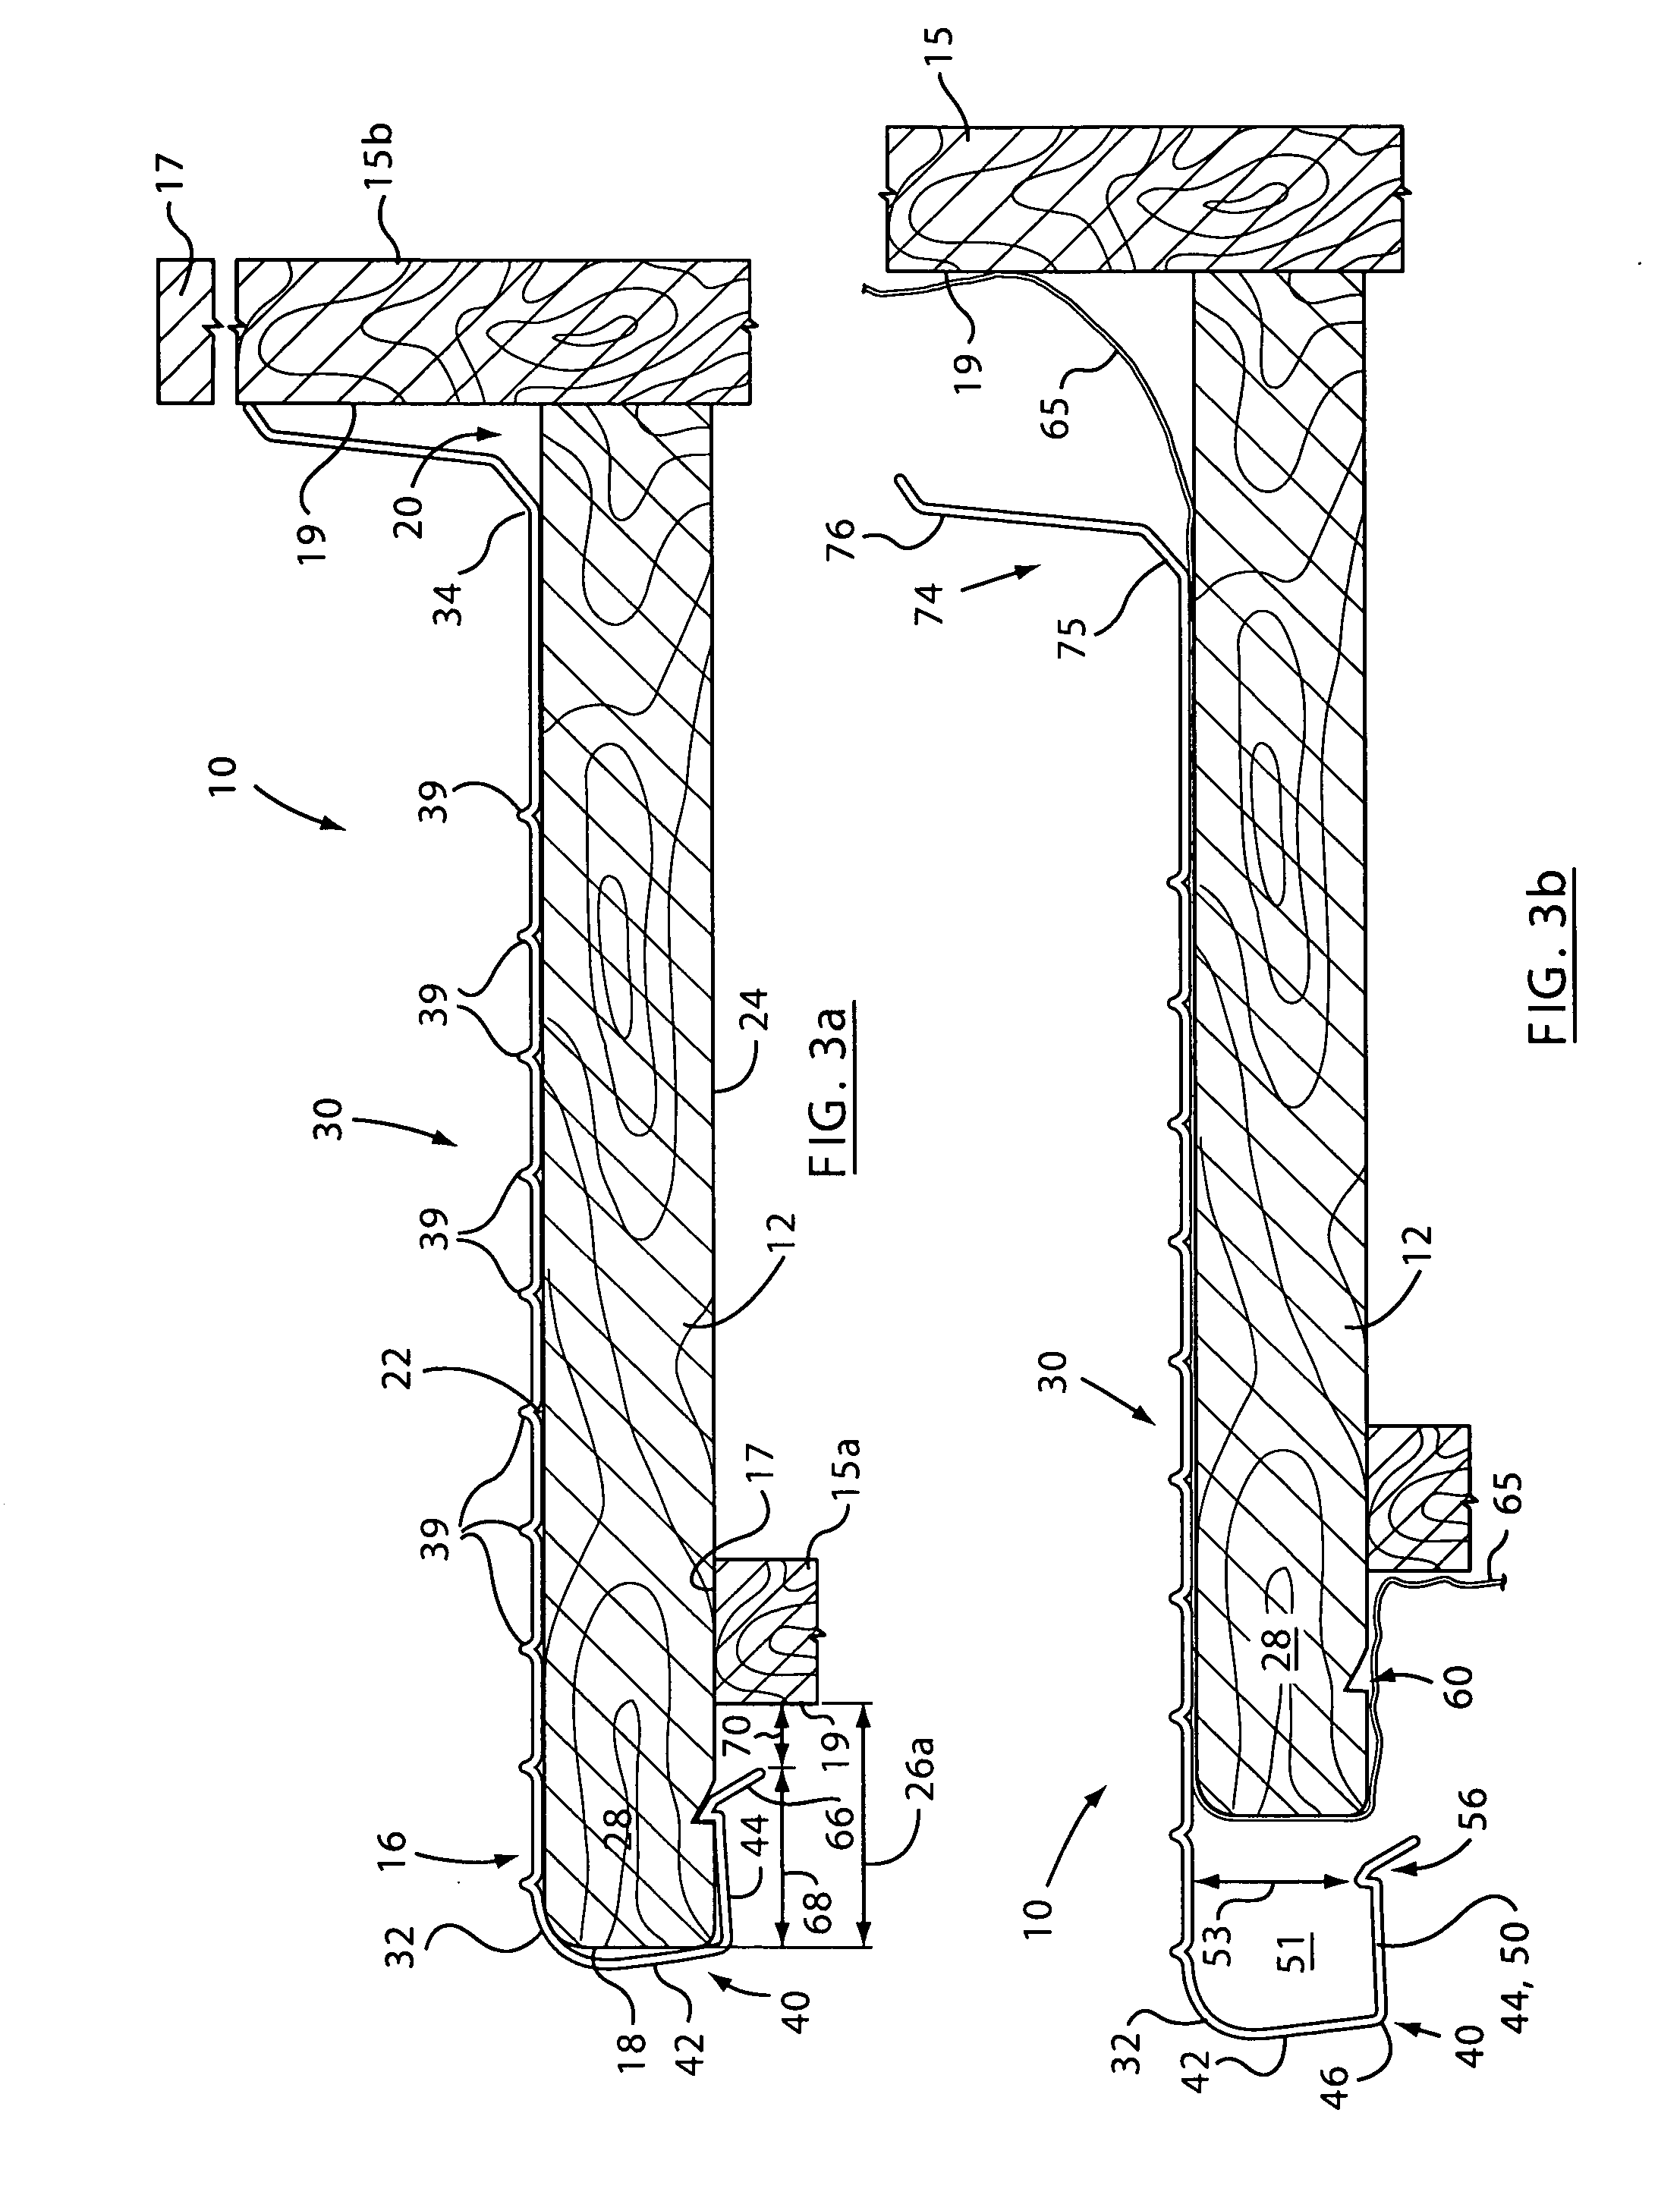 Stair tread protection system